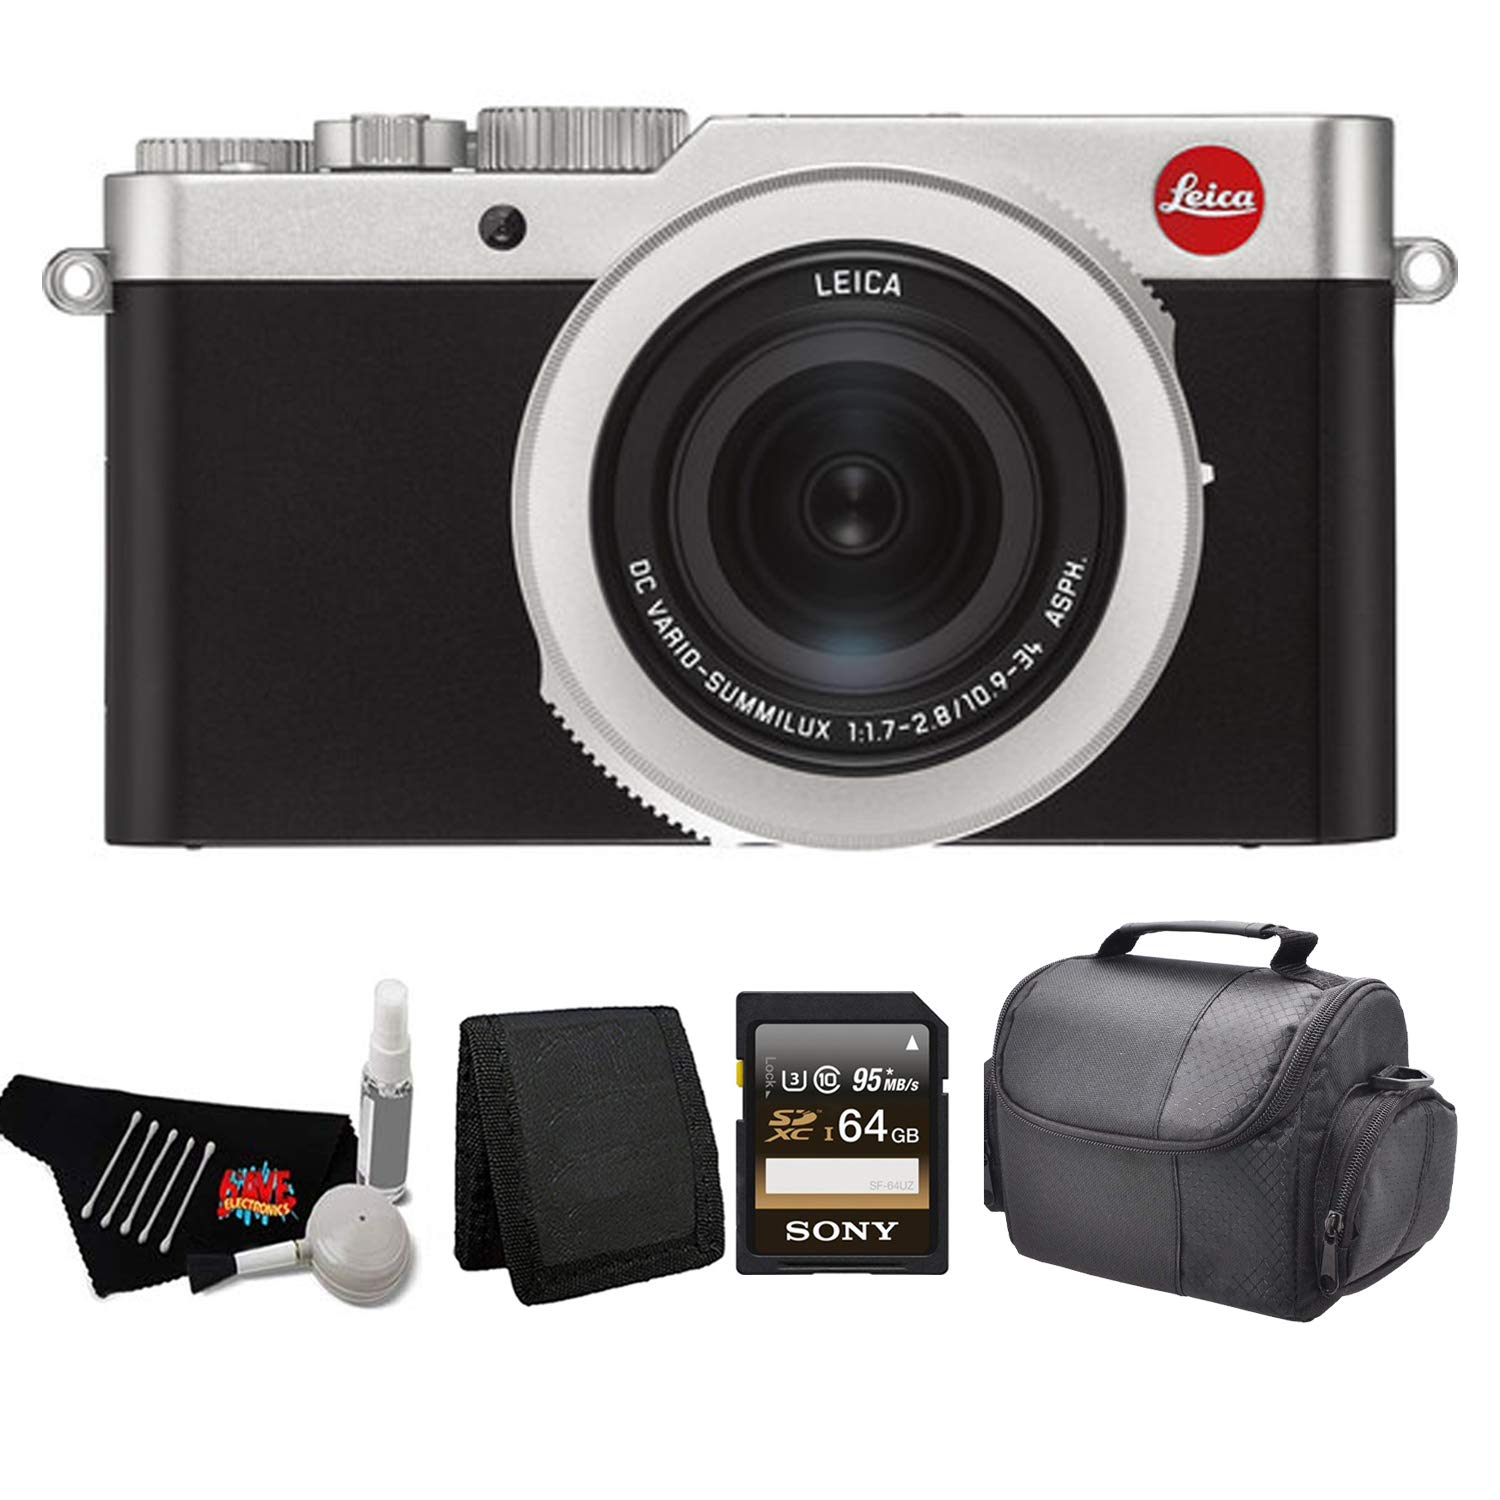 Leica D-Lux 7 Point and Shoot Digital Camera 19116 Kit +64GB Memory Card - image 1 of 6